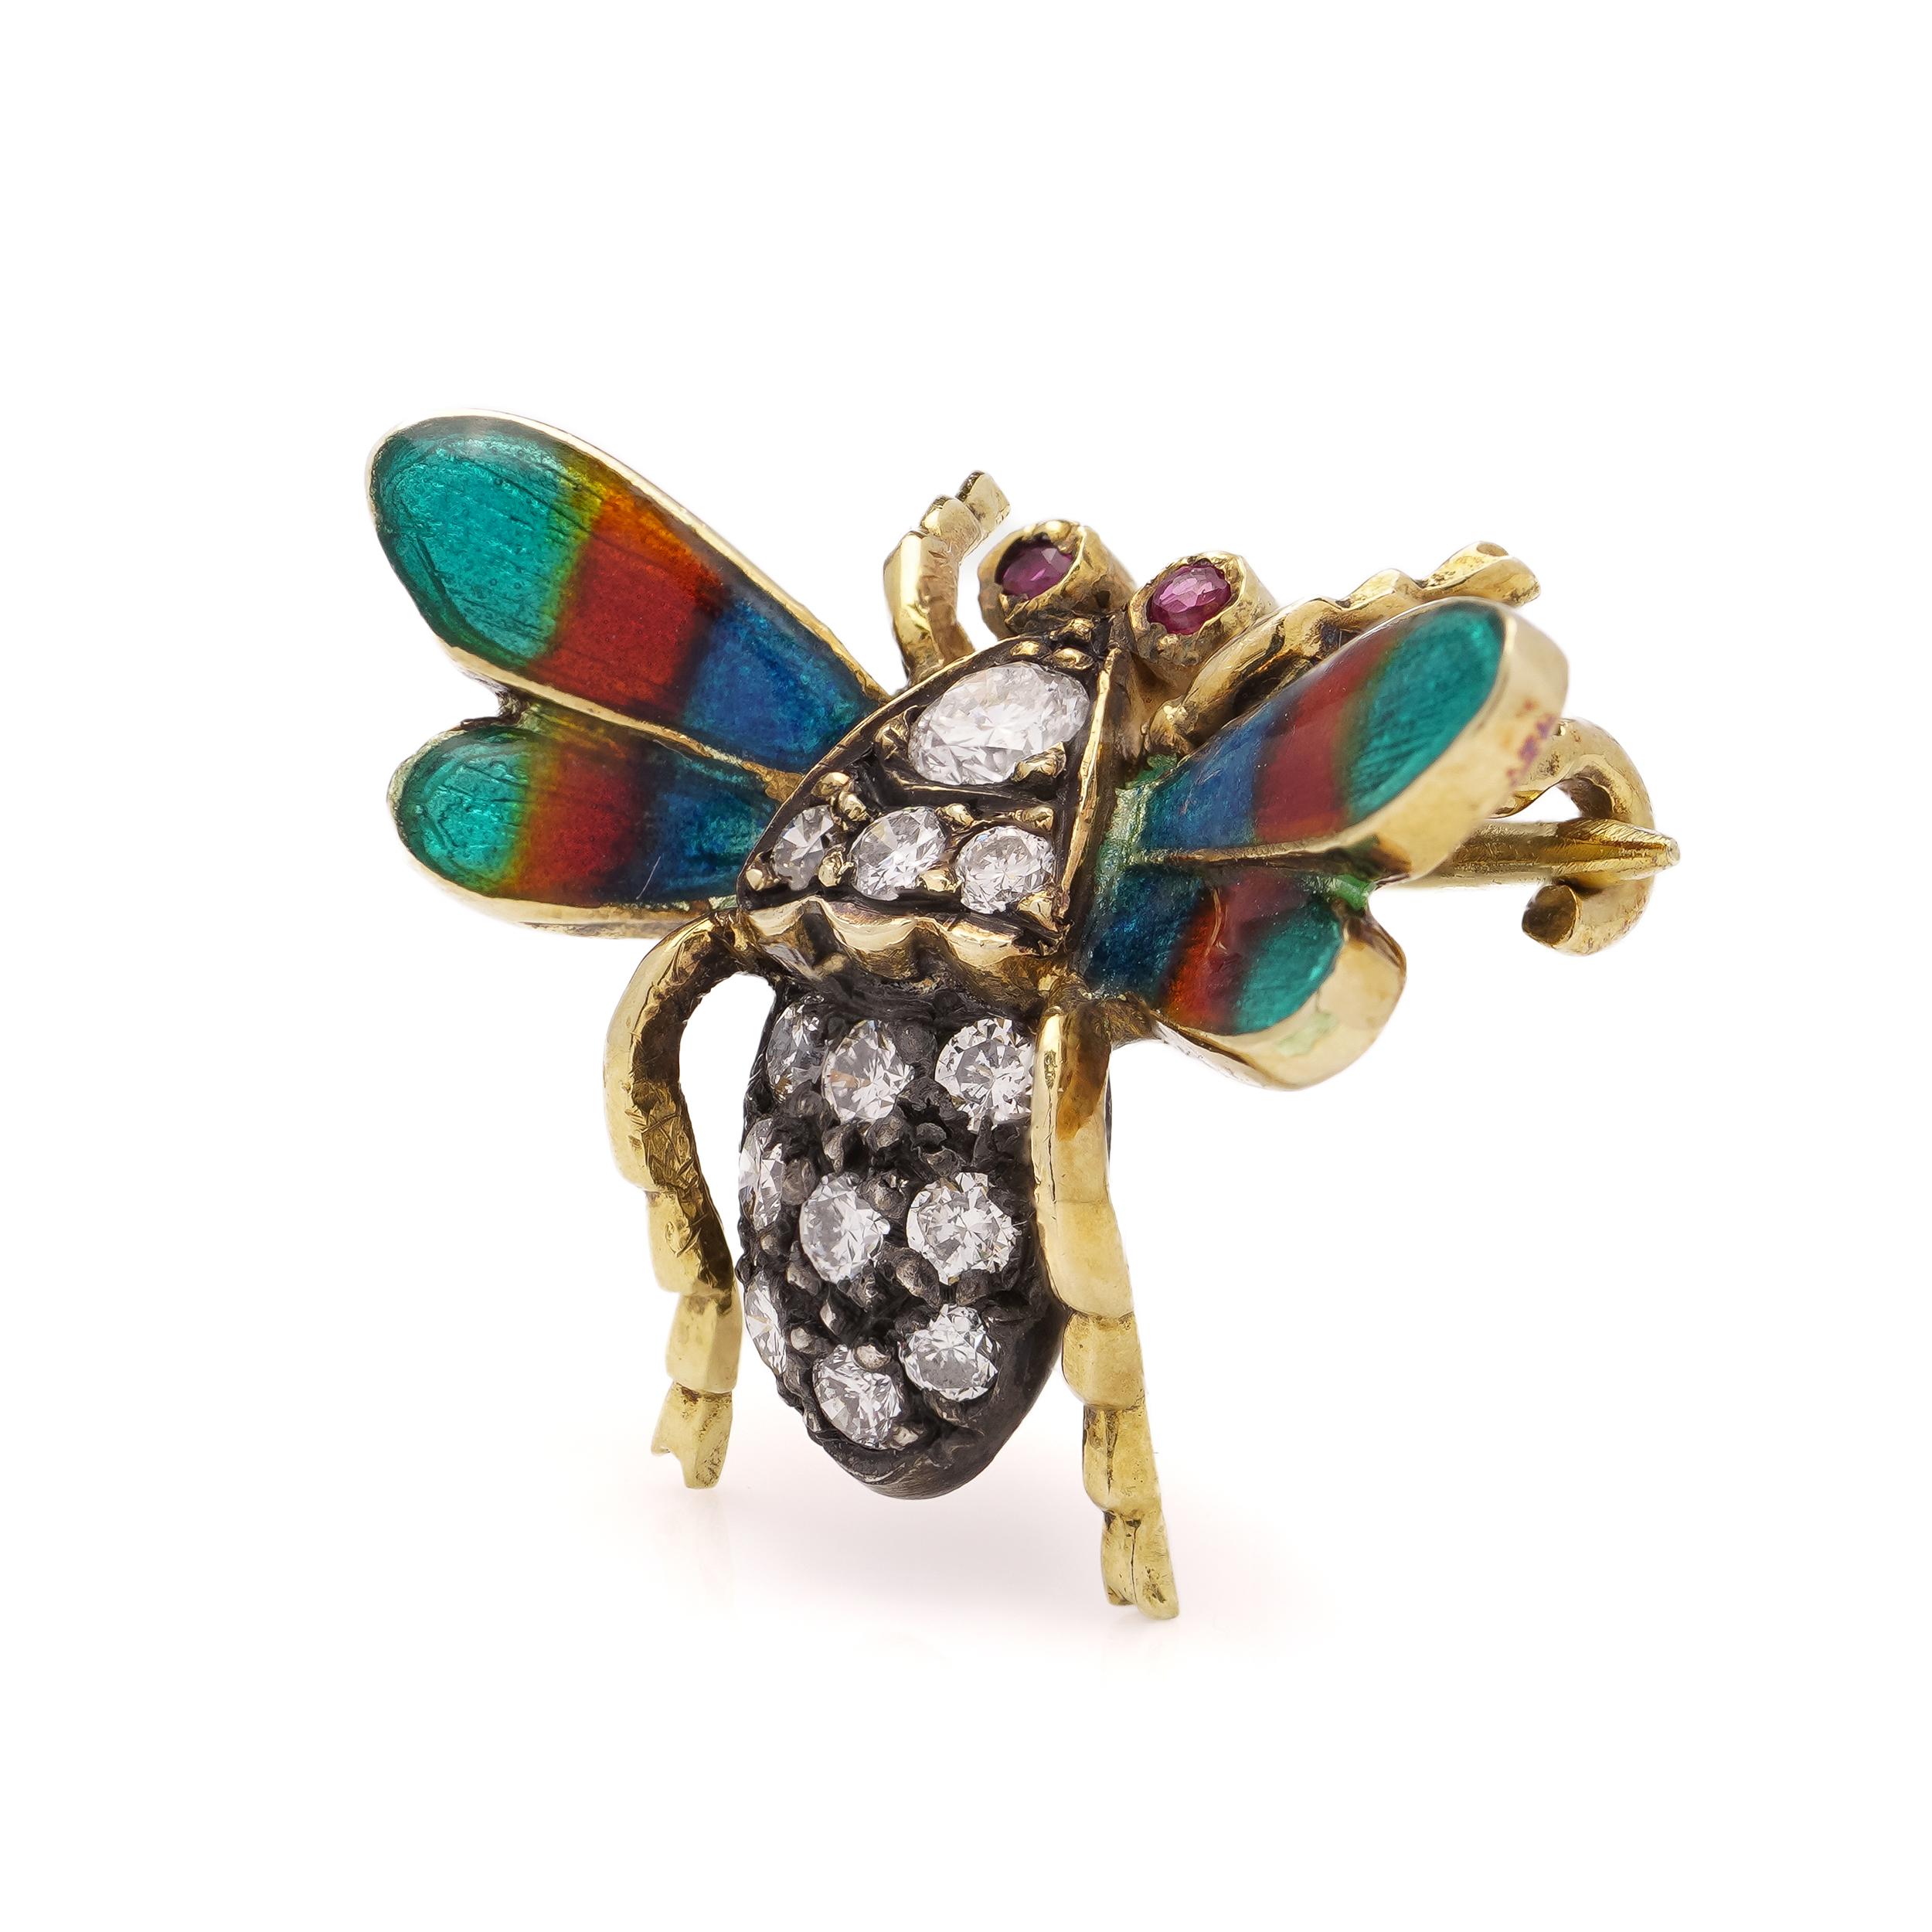  Edwardian 18kt. yellow gold and silver open-winged insect brooch For Sale 2